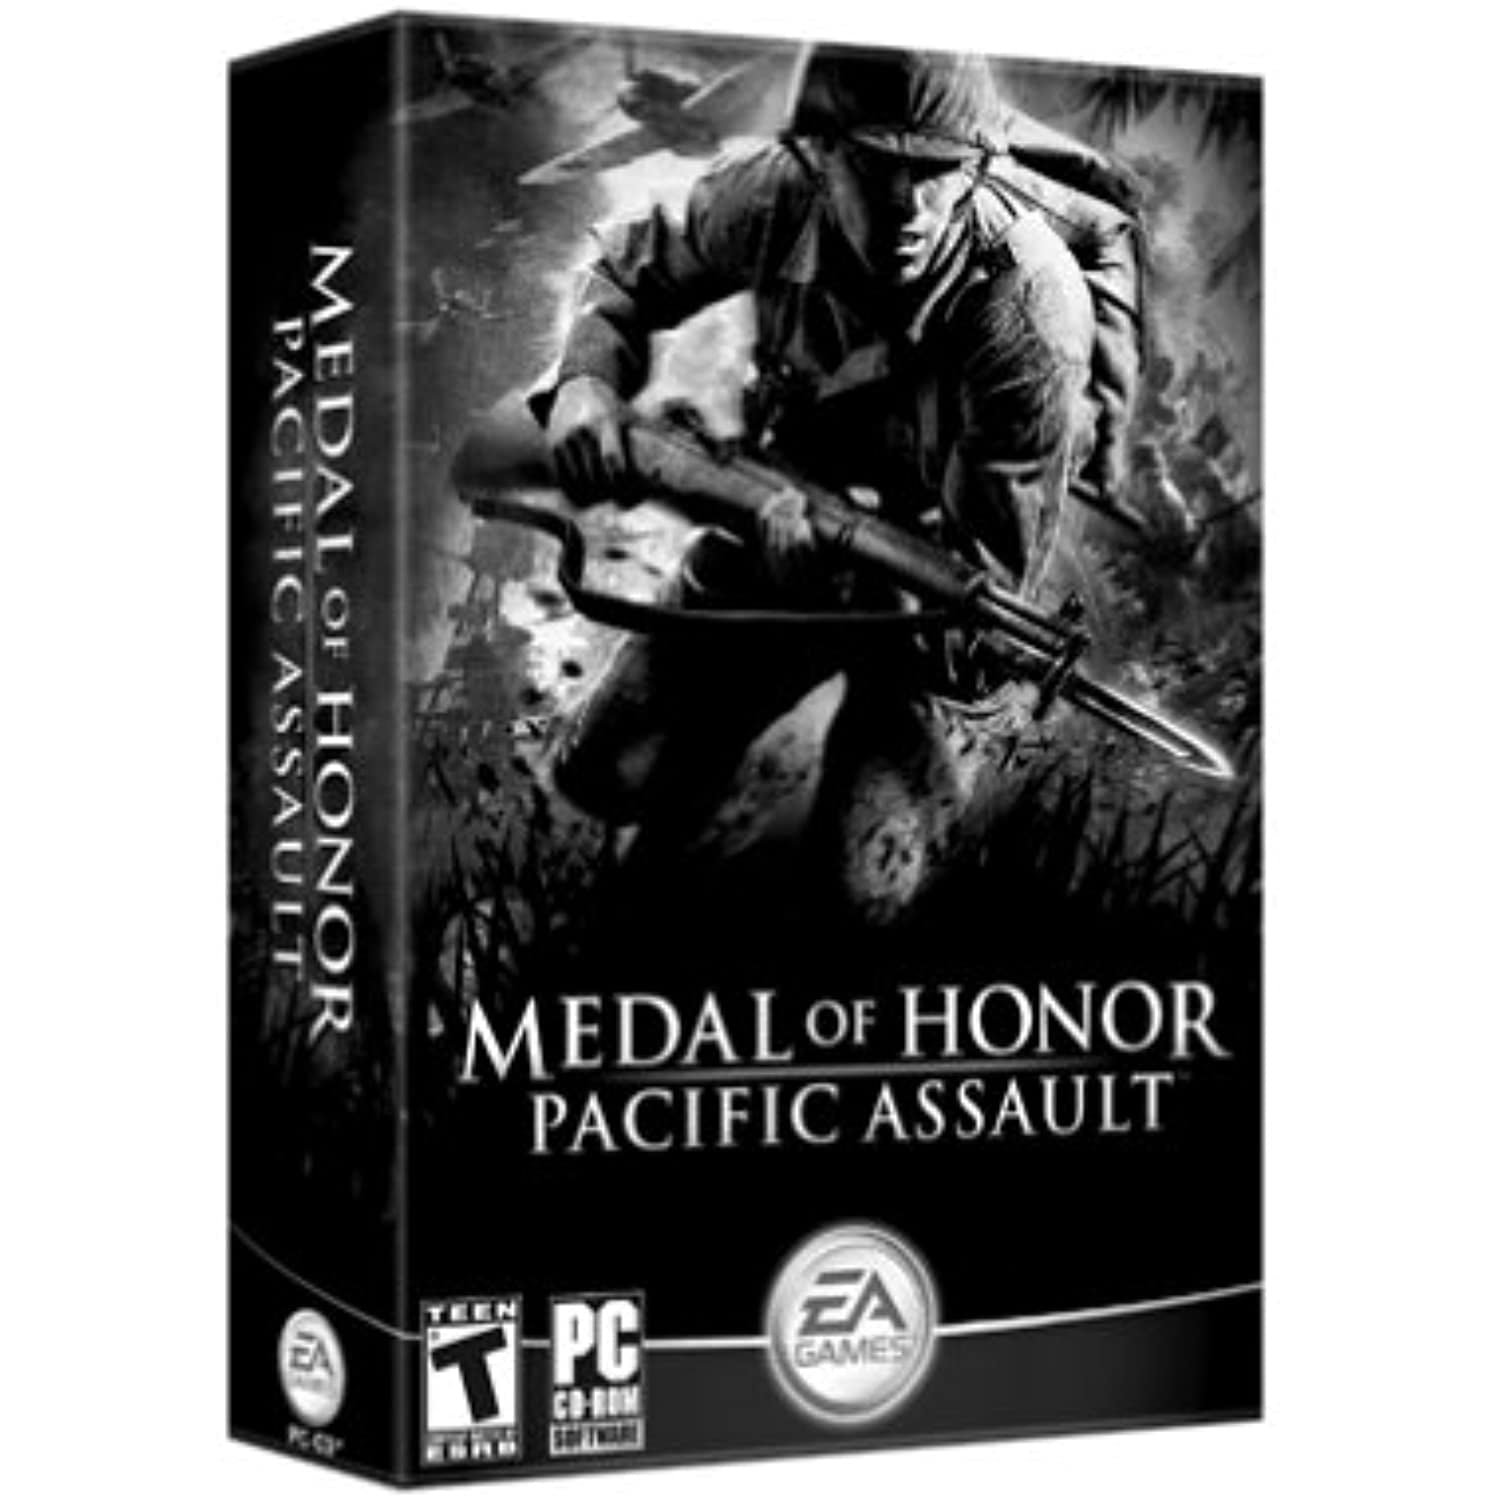 Medal of Honor: Pacific Assault grátis no PC